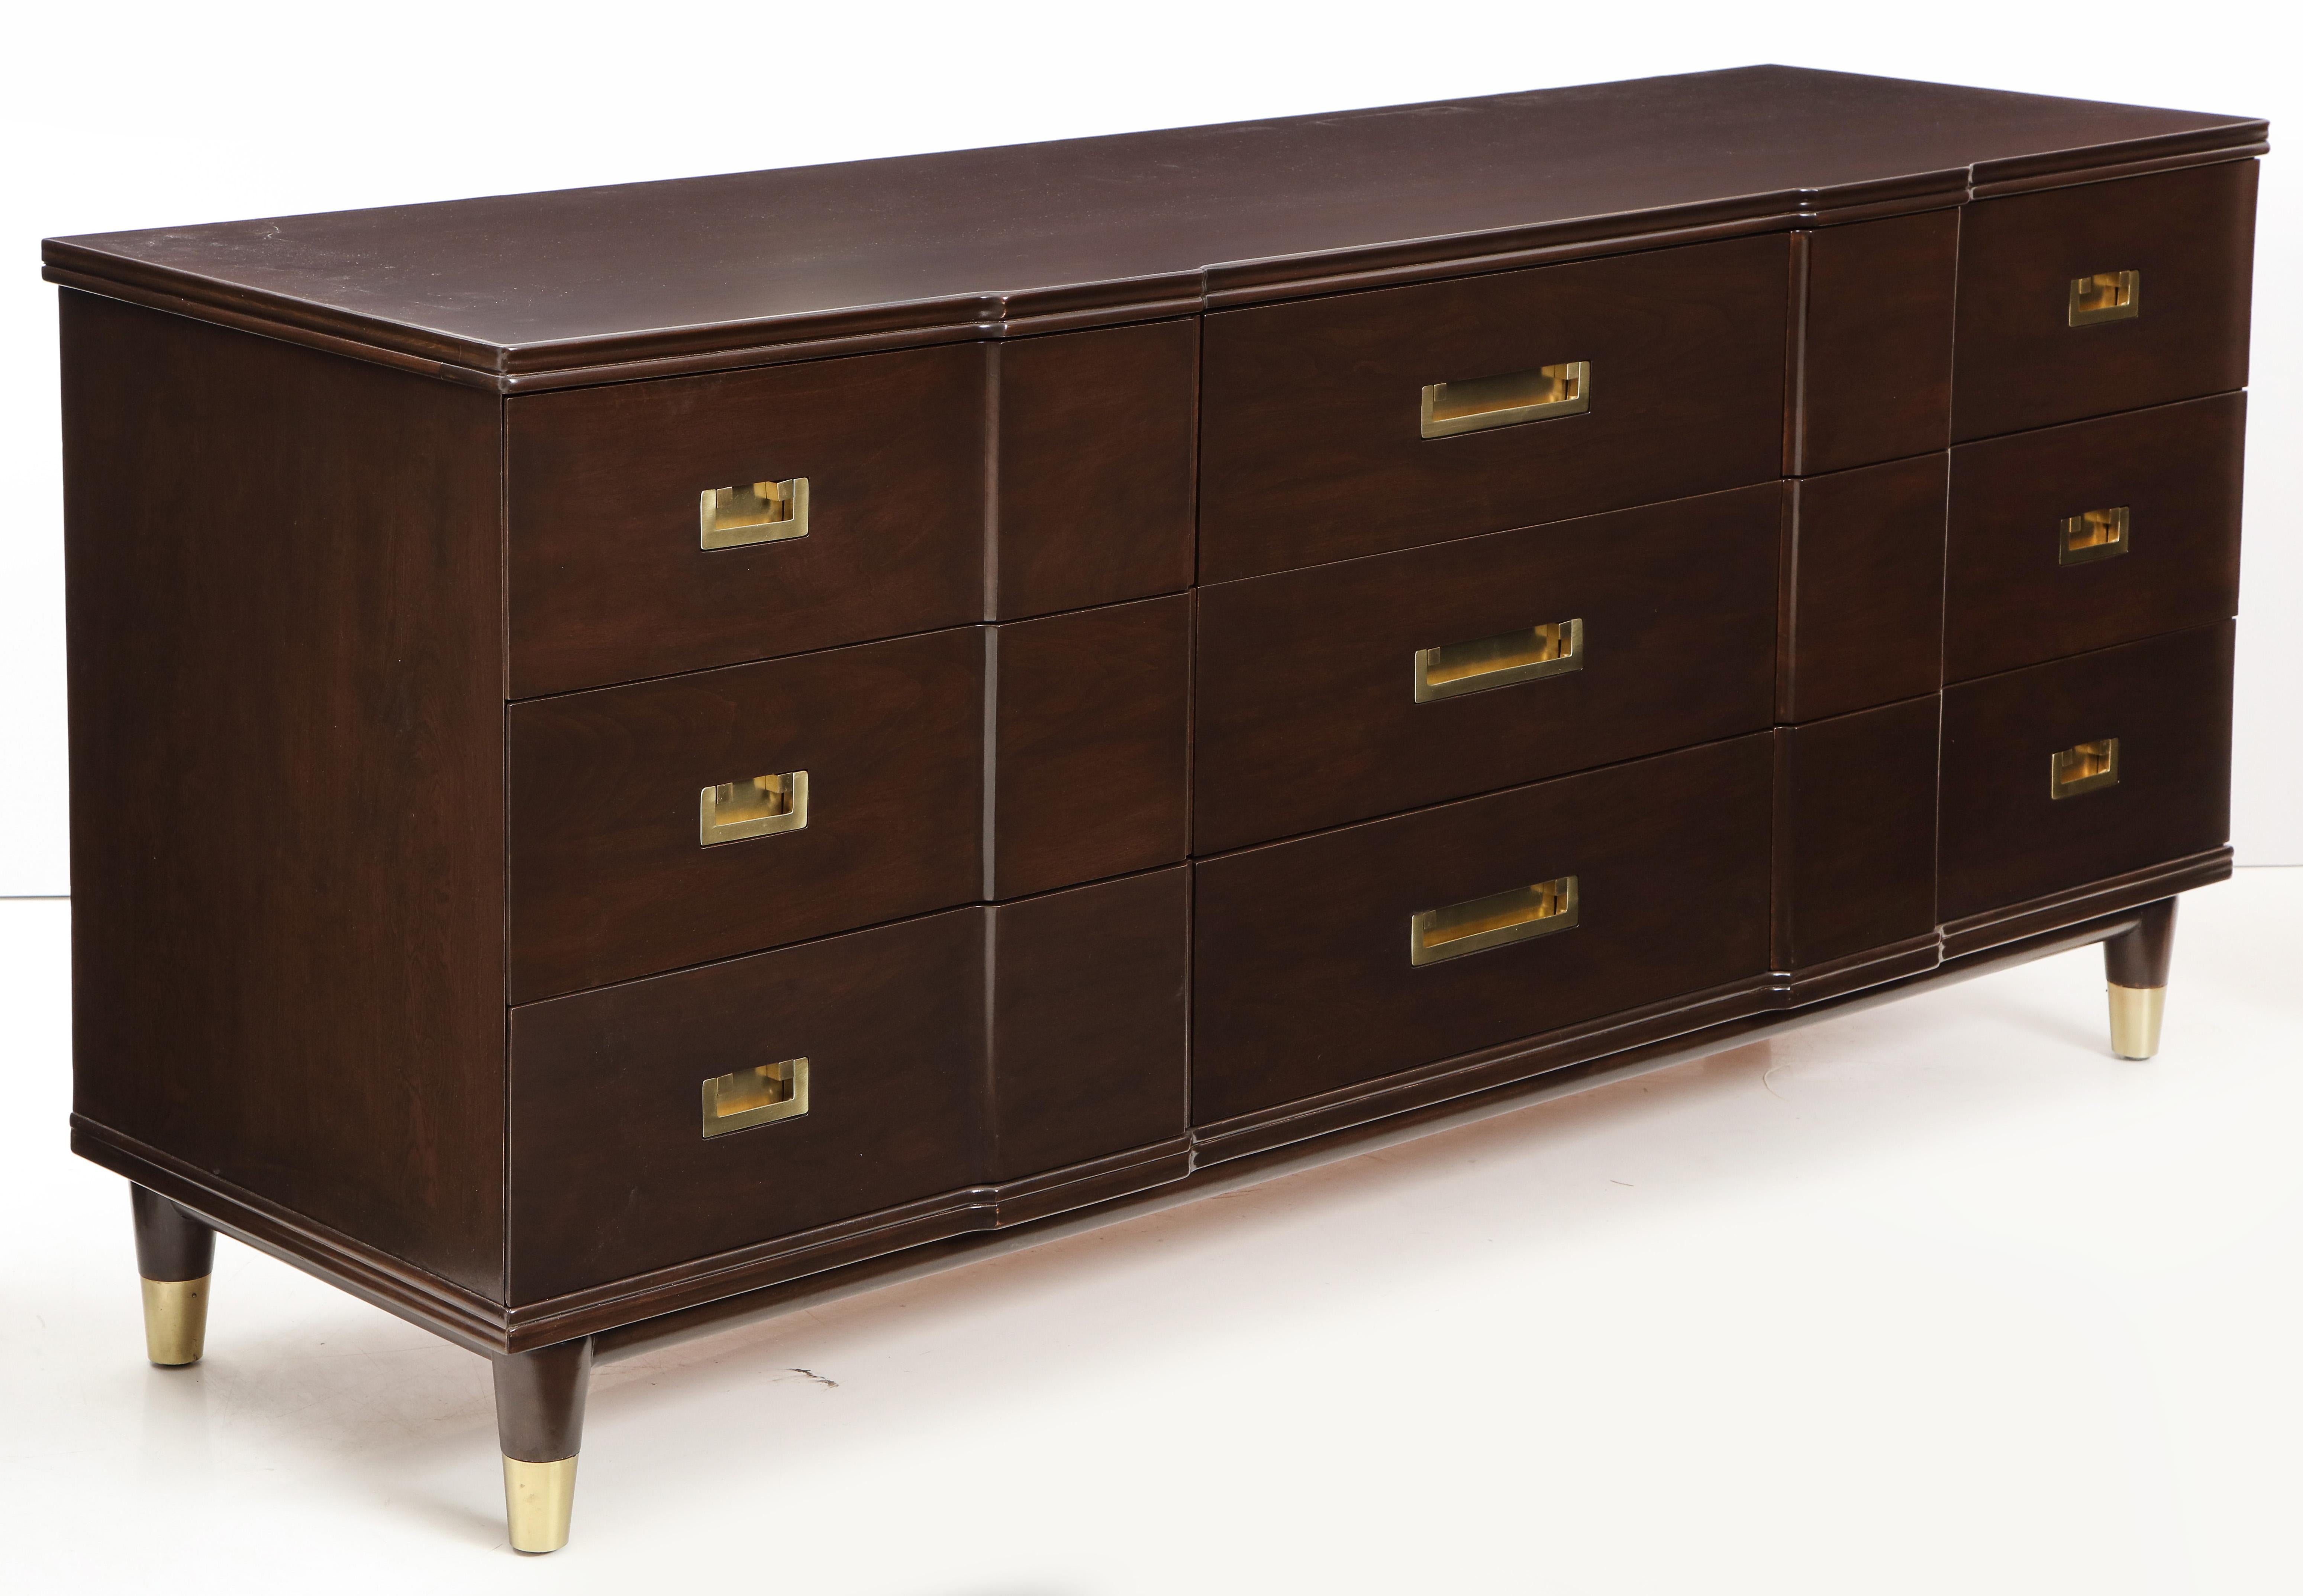 Midcentury classically styled 9-drawer dark brown stained walnut dresser with brushed brass inset pulls and sabots. Excellent restored condition. Signed.
On display at 200 Lexington Avenue, 10th floor.